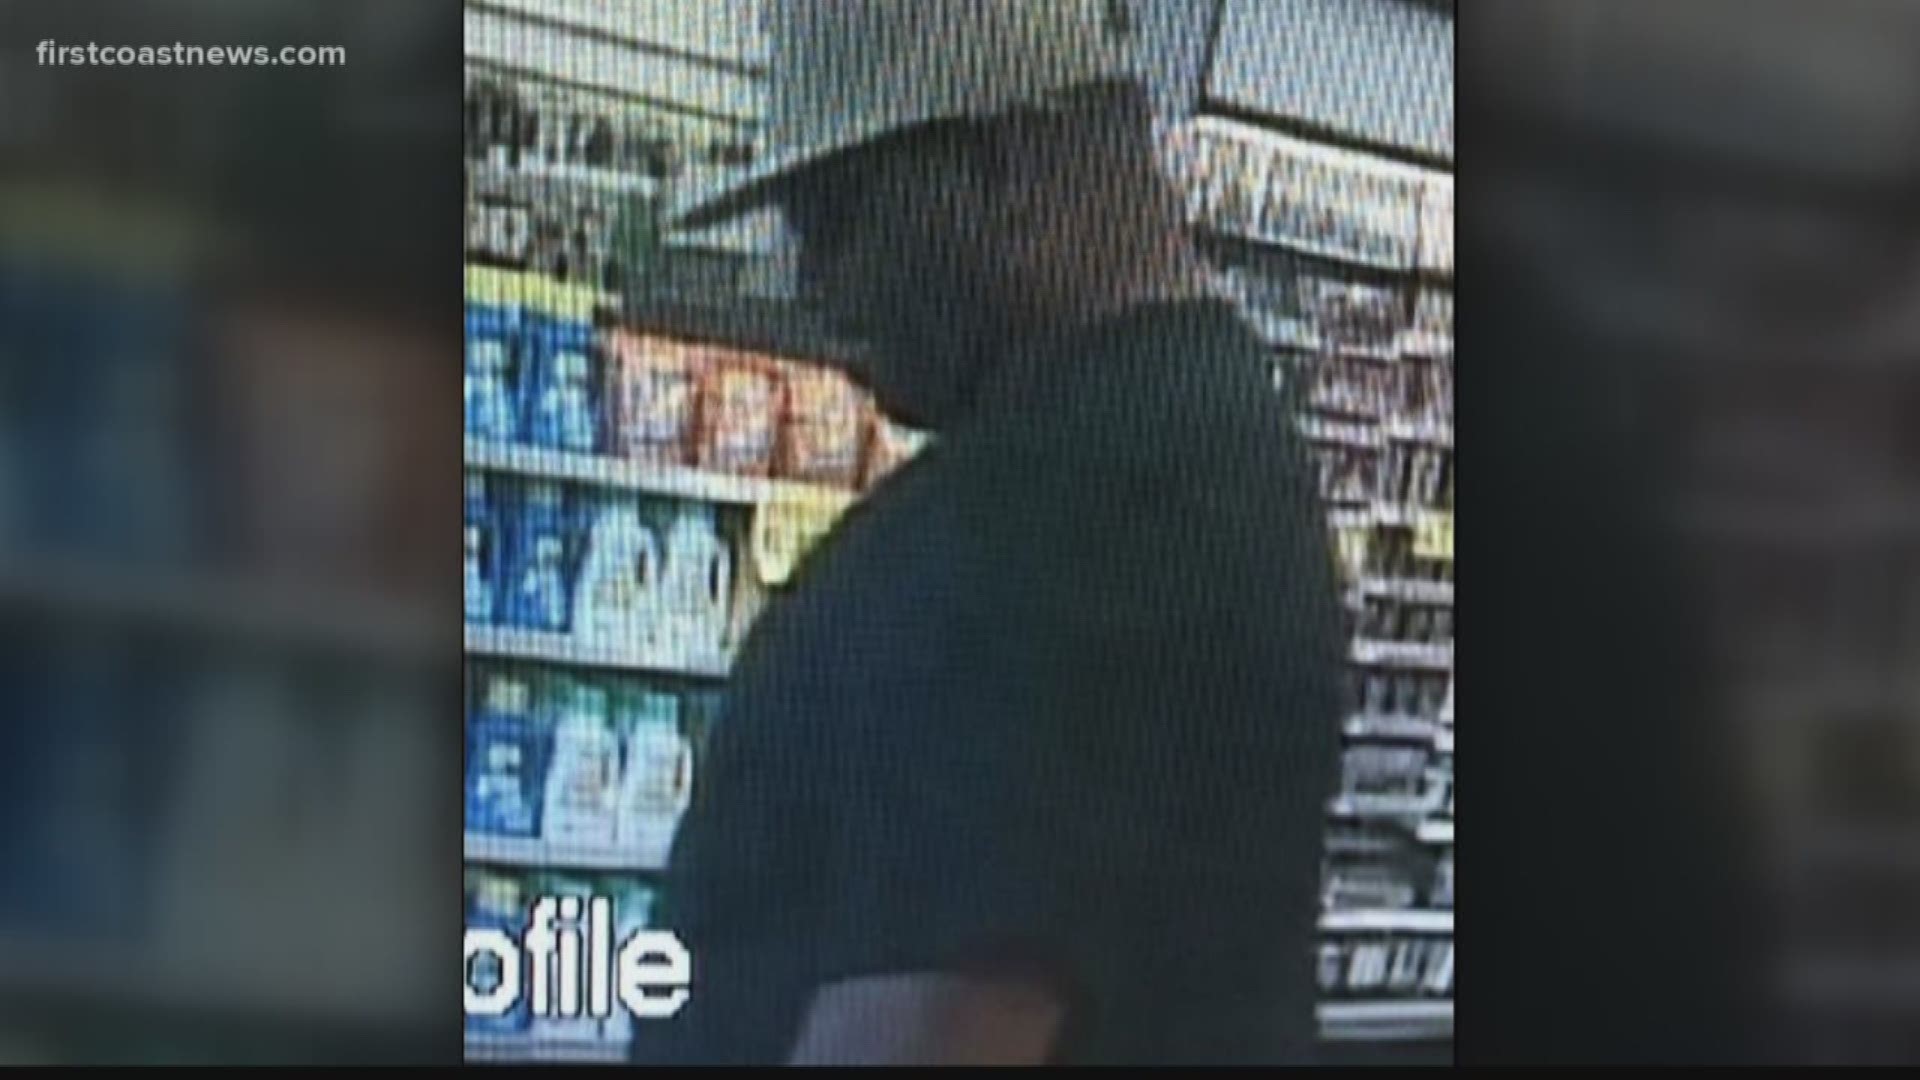 The St. Johns County Sheriff's Office is looking to identify a man suspected of stealing a 74-year-old's credit card and making thousands in charges.